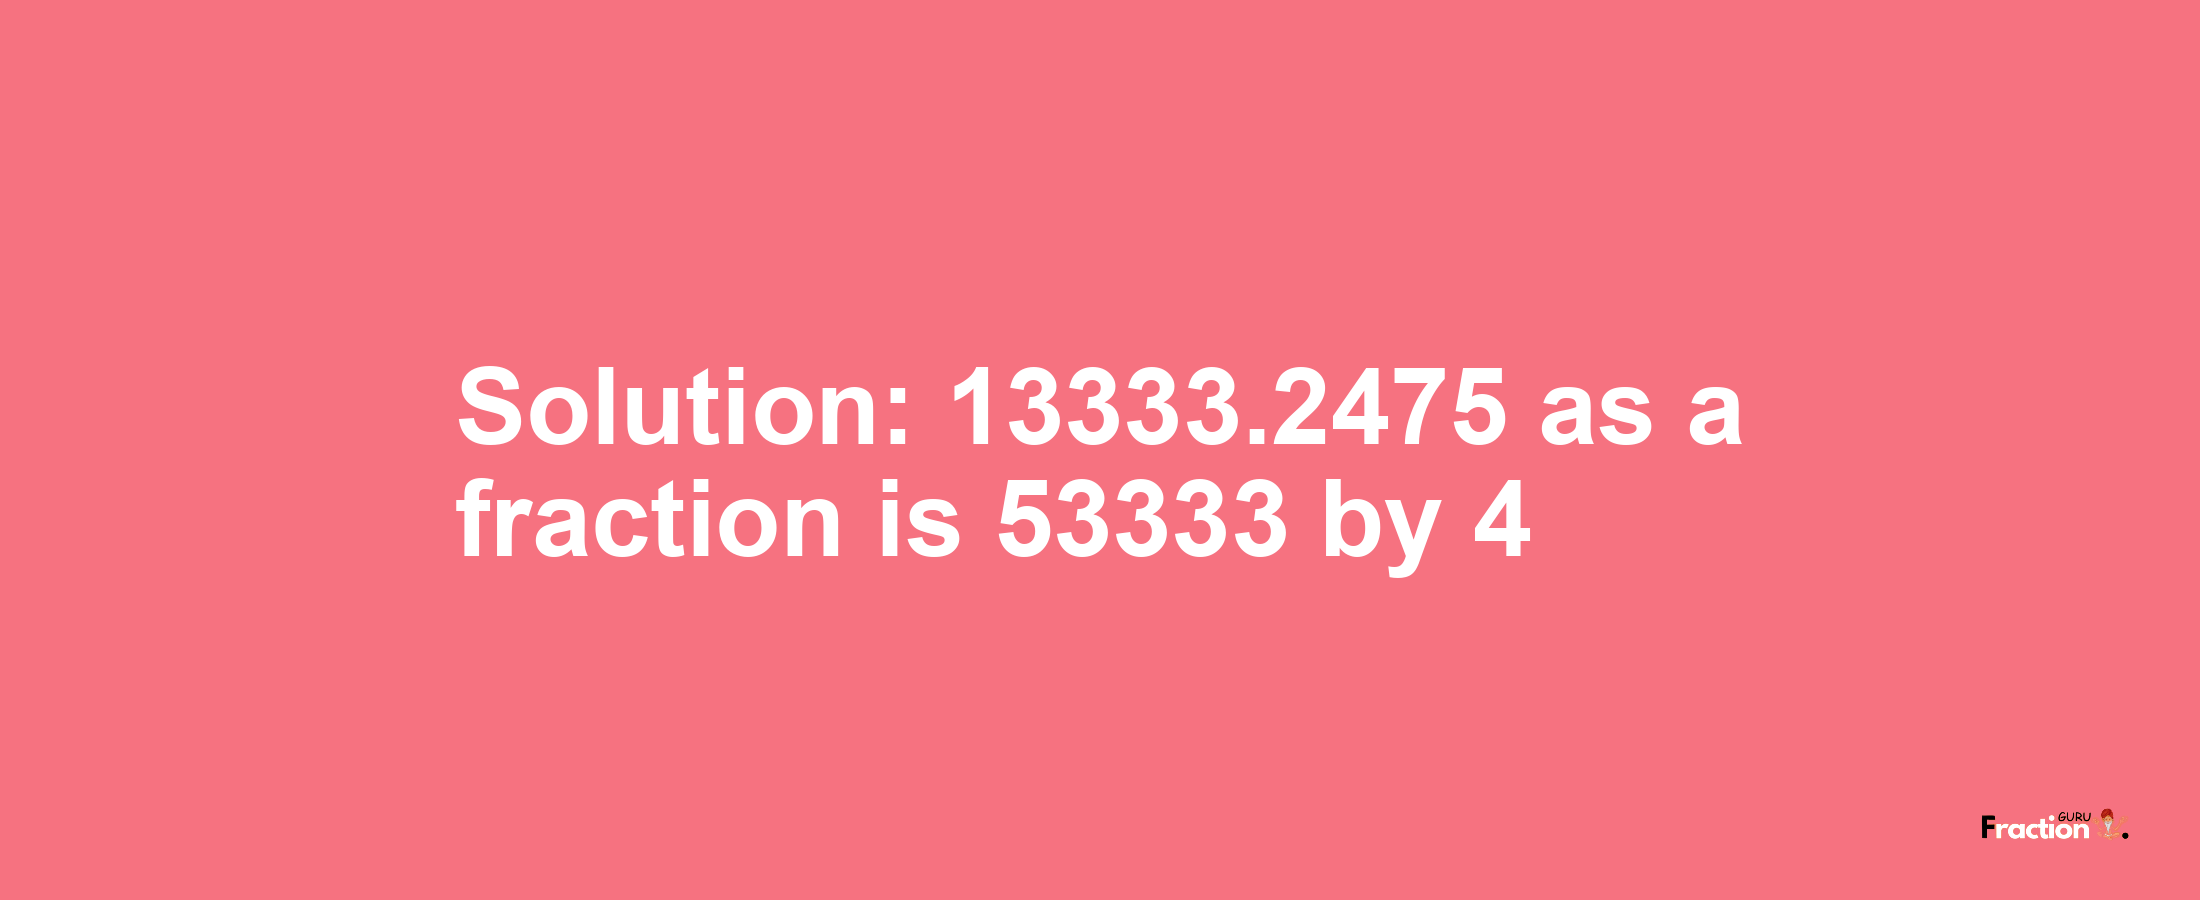 Solution:13333.2475 as a fraction is 53333/4